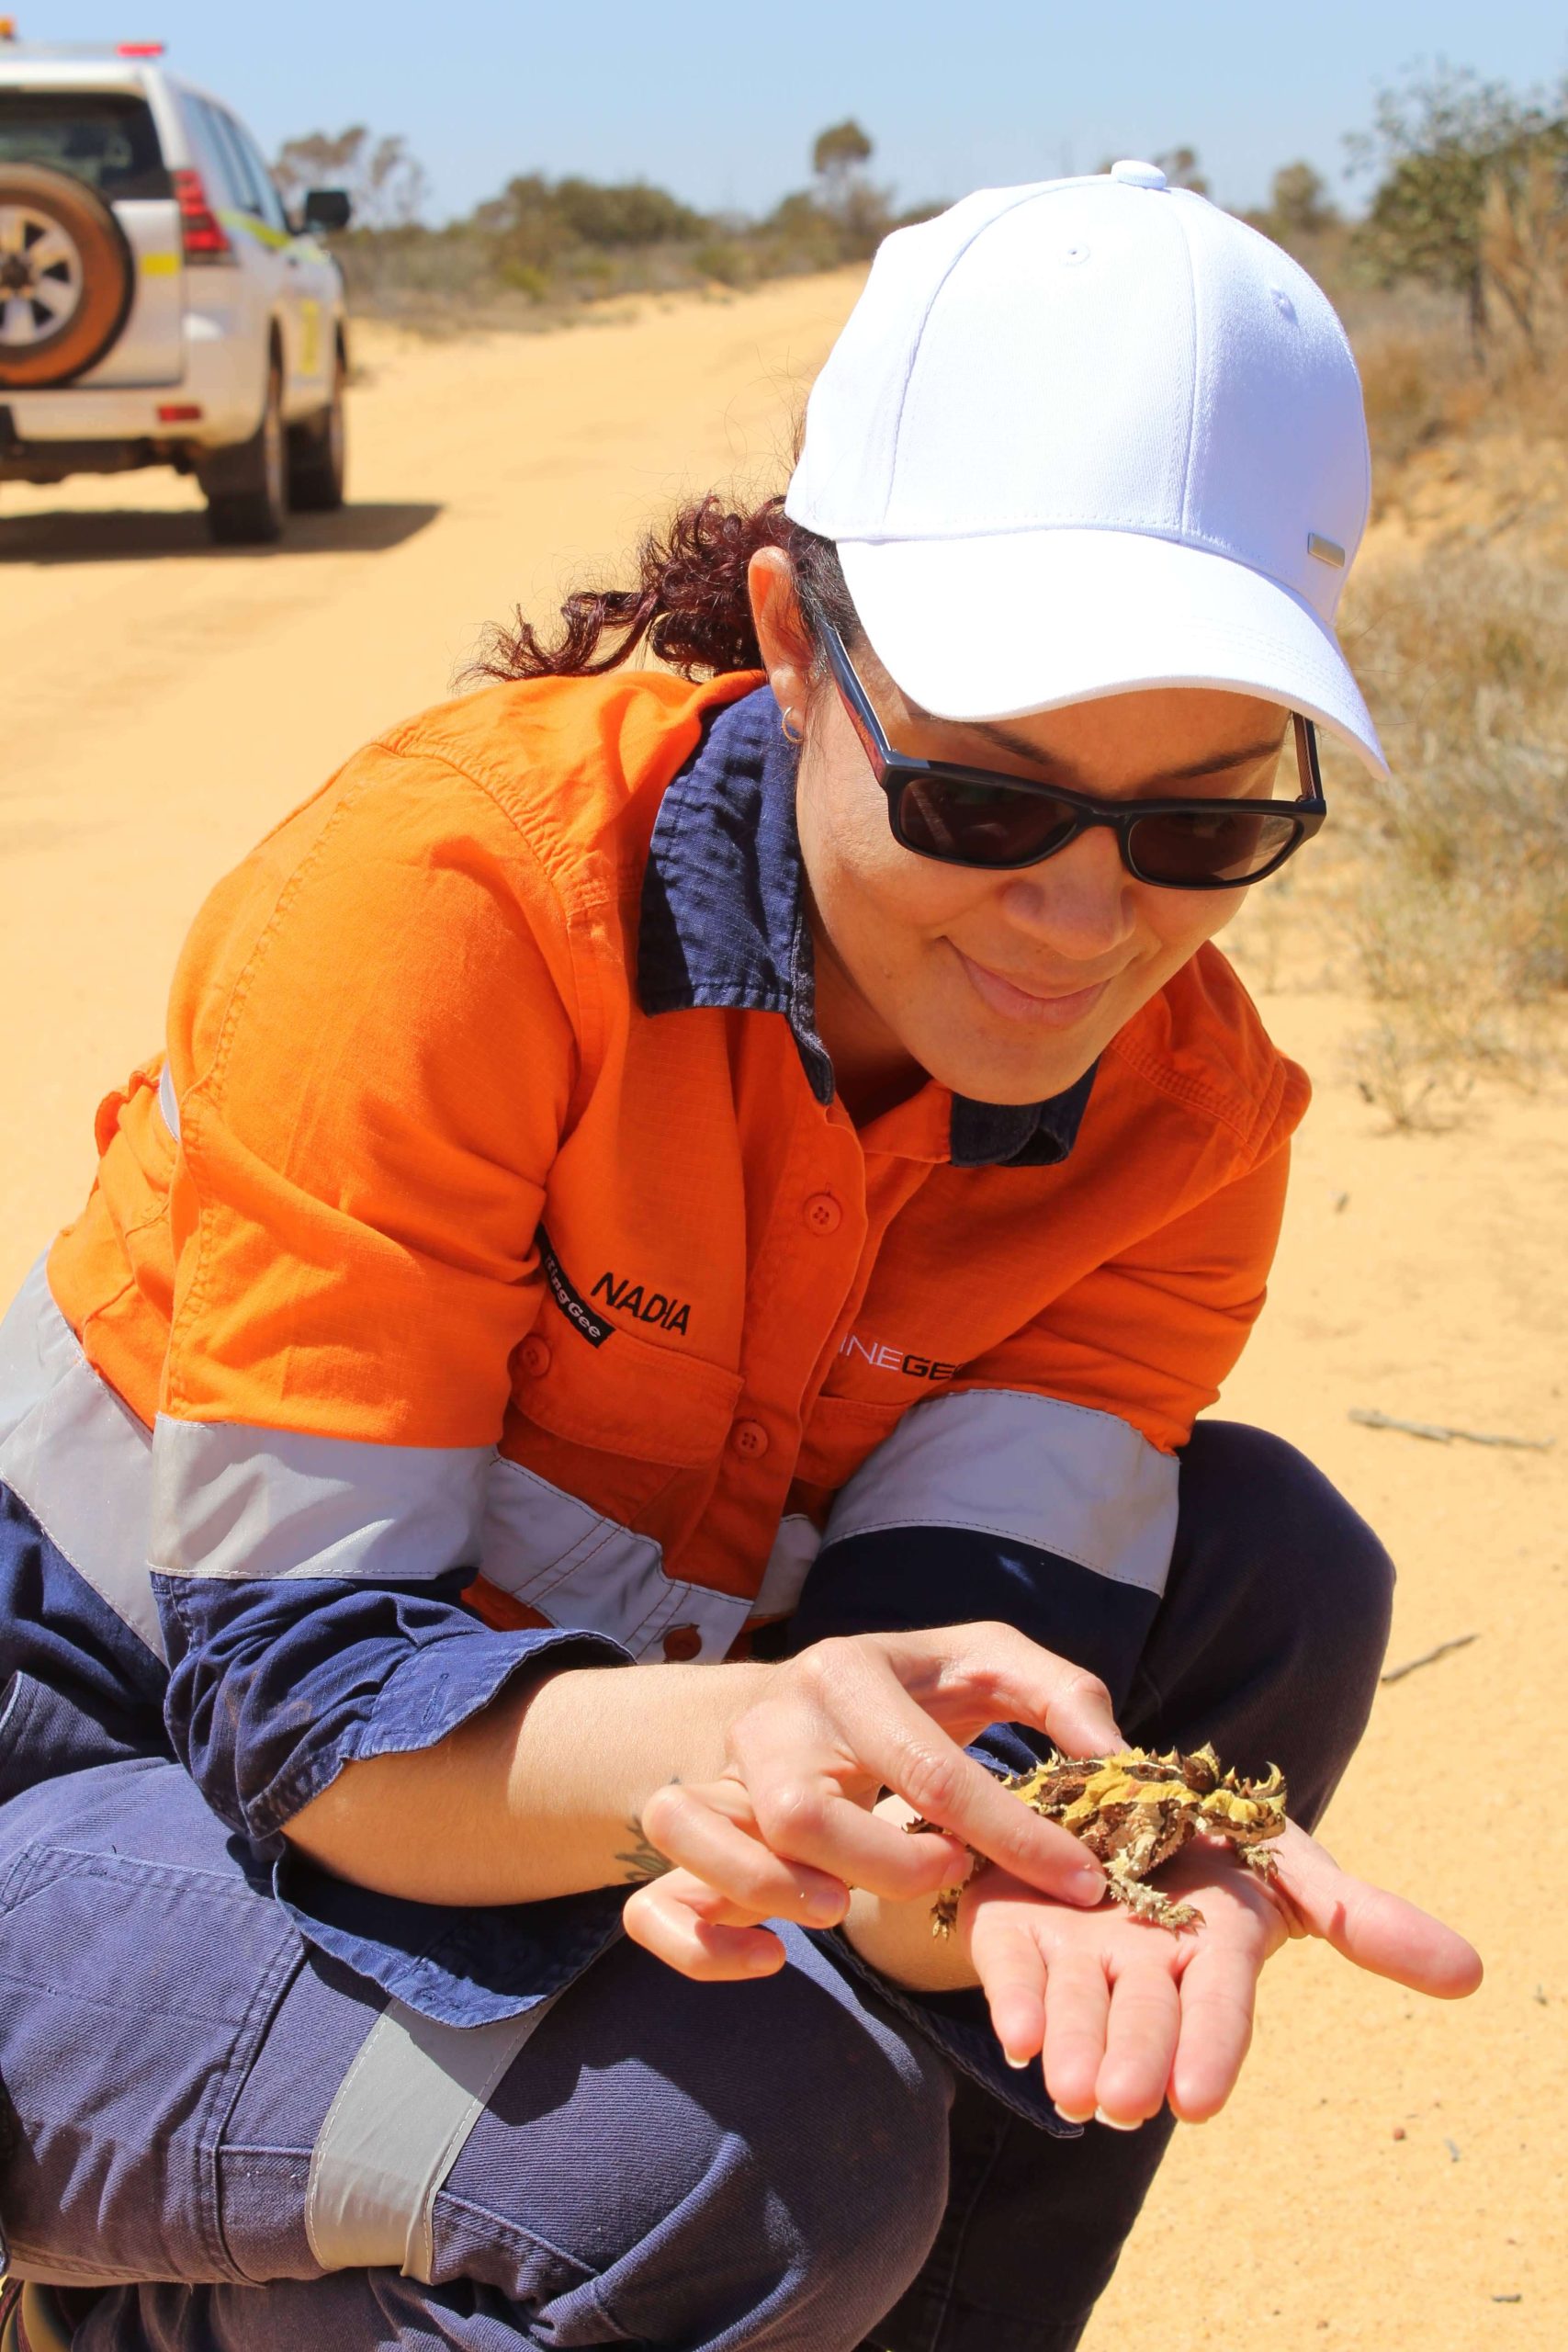 Thorny Devil in the great Australian Desert, Vimy Resources. 2020.